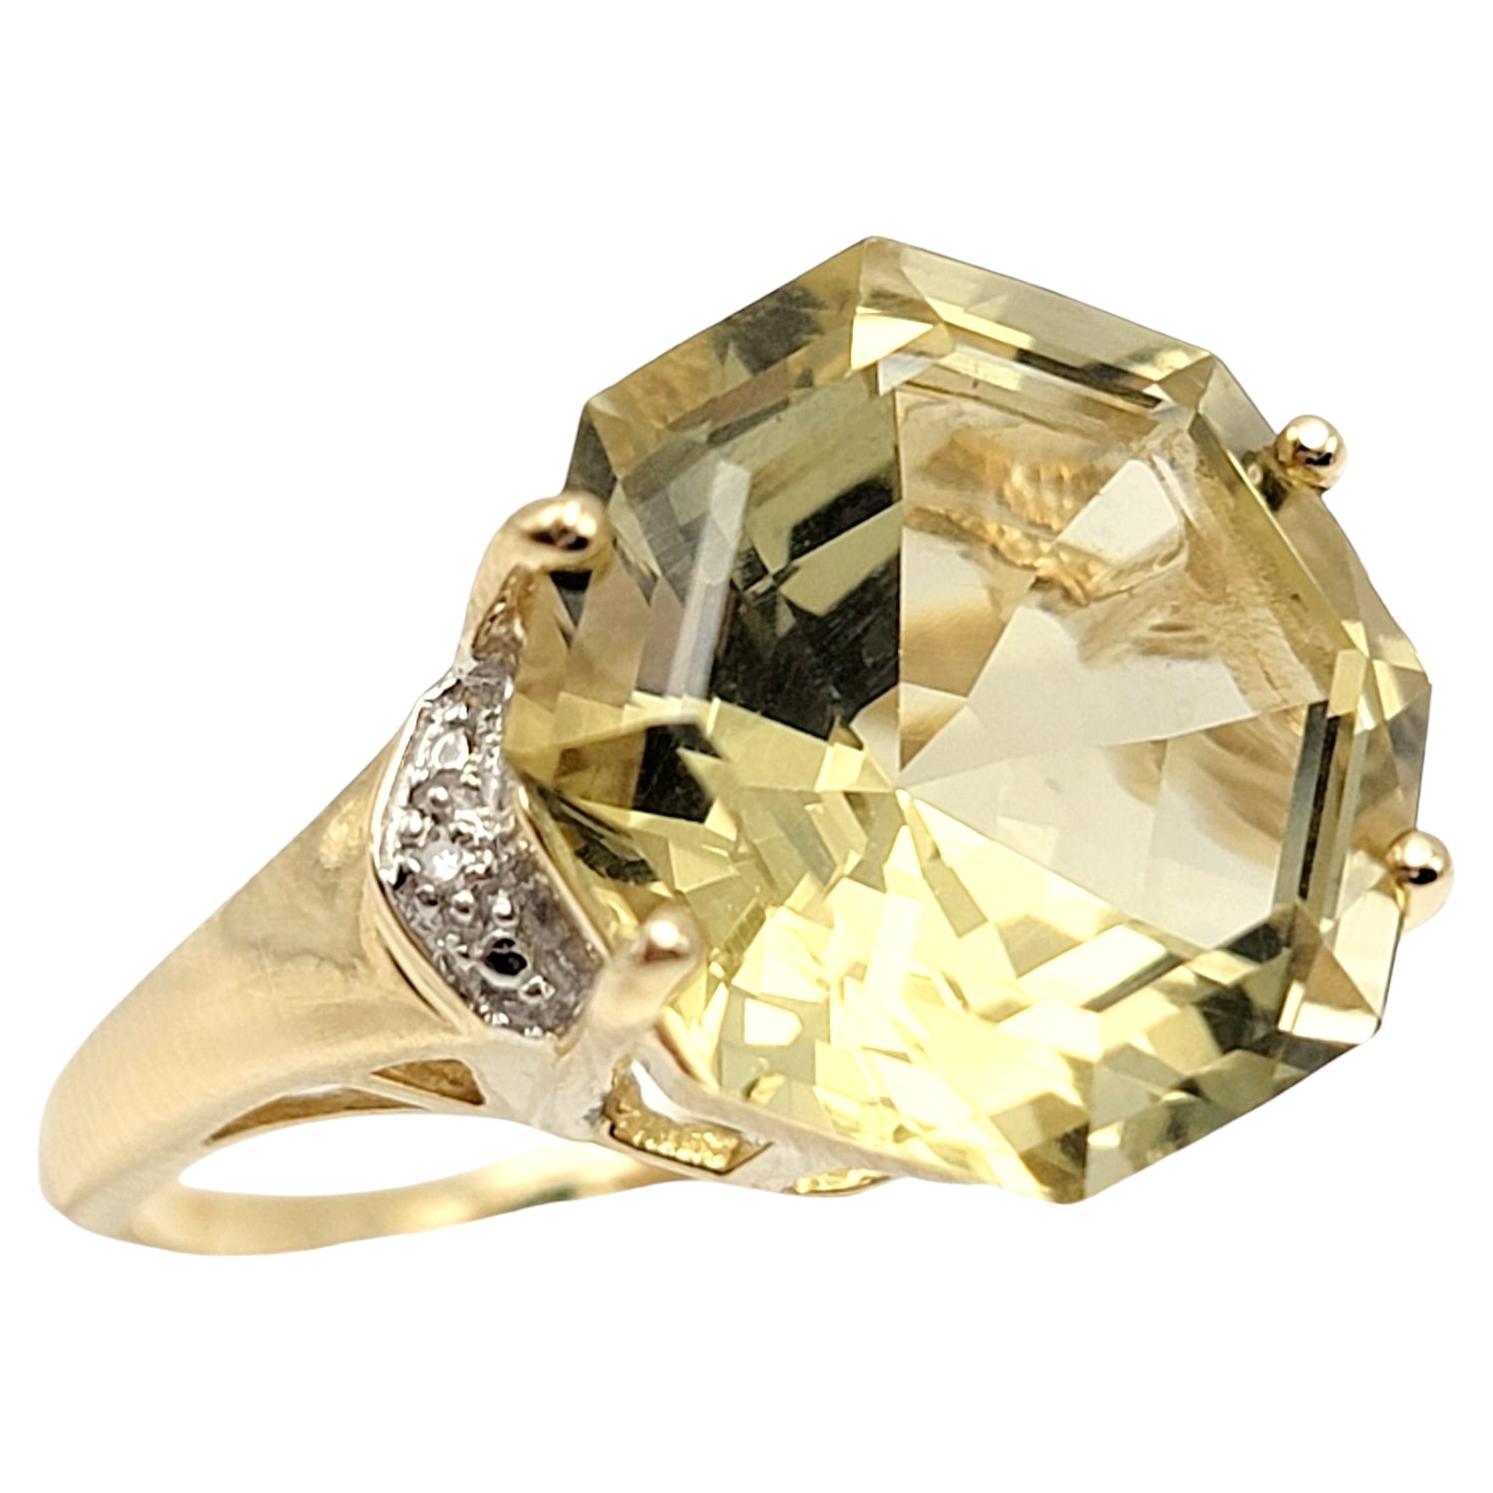 11.55 Carat Octagonal Cut Citrine Solitaire Cocktail Ring with Diamond Accents For Sale